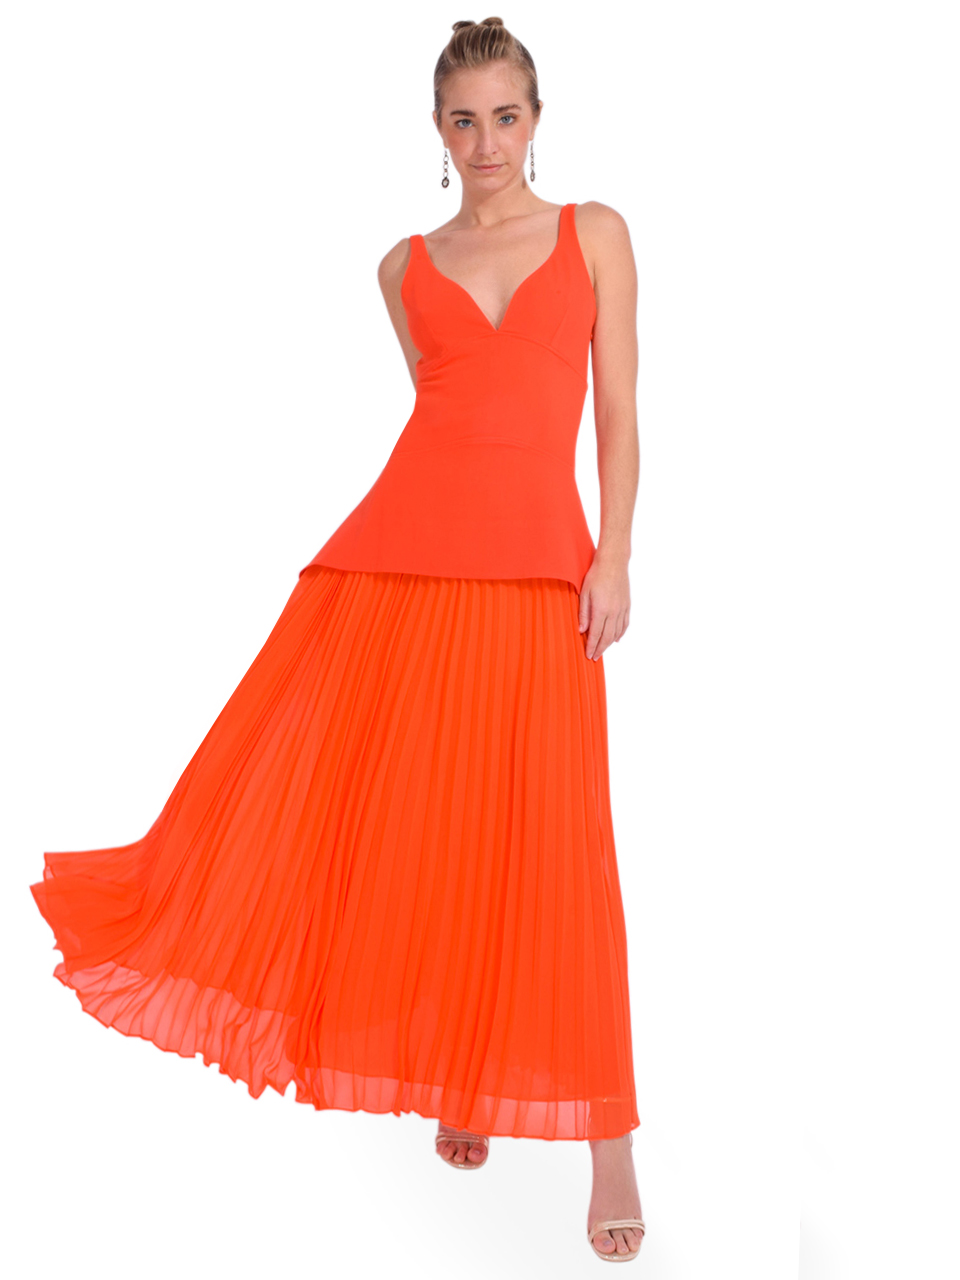 SIMKHAI Sequoia Pleated Combo Sleeveless V-Neck Midi Dress in Flame Front View 2